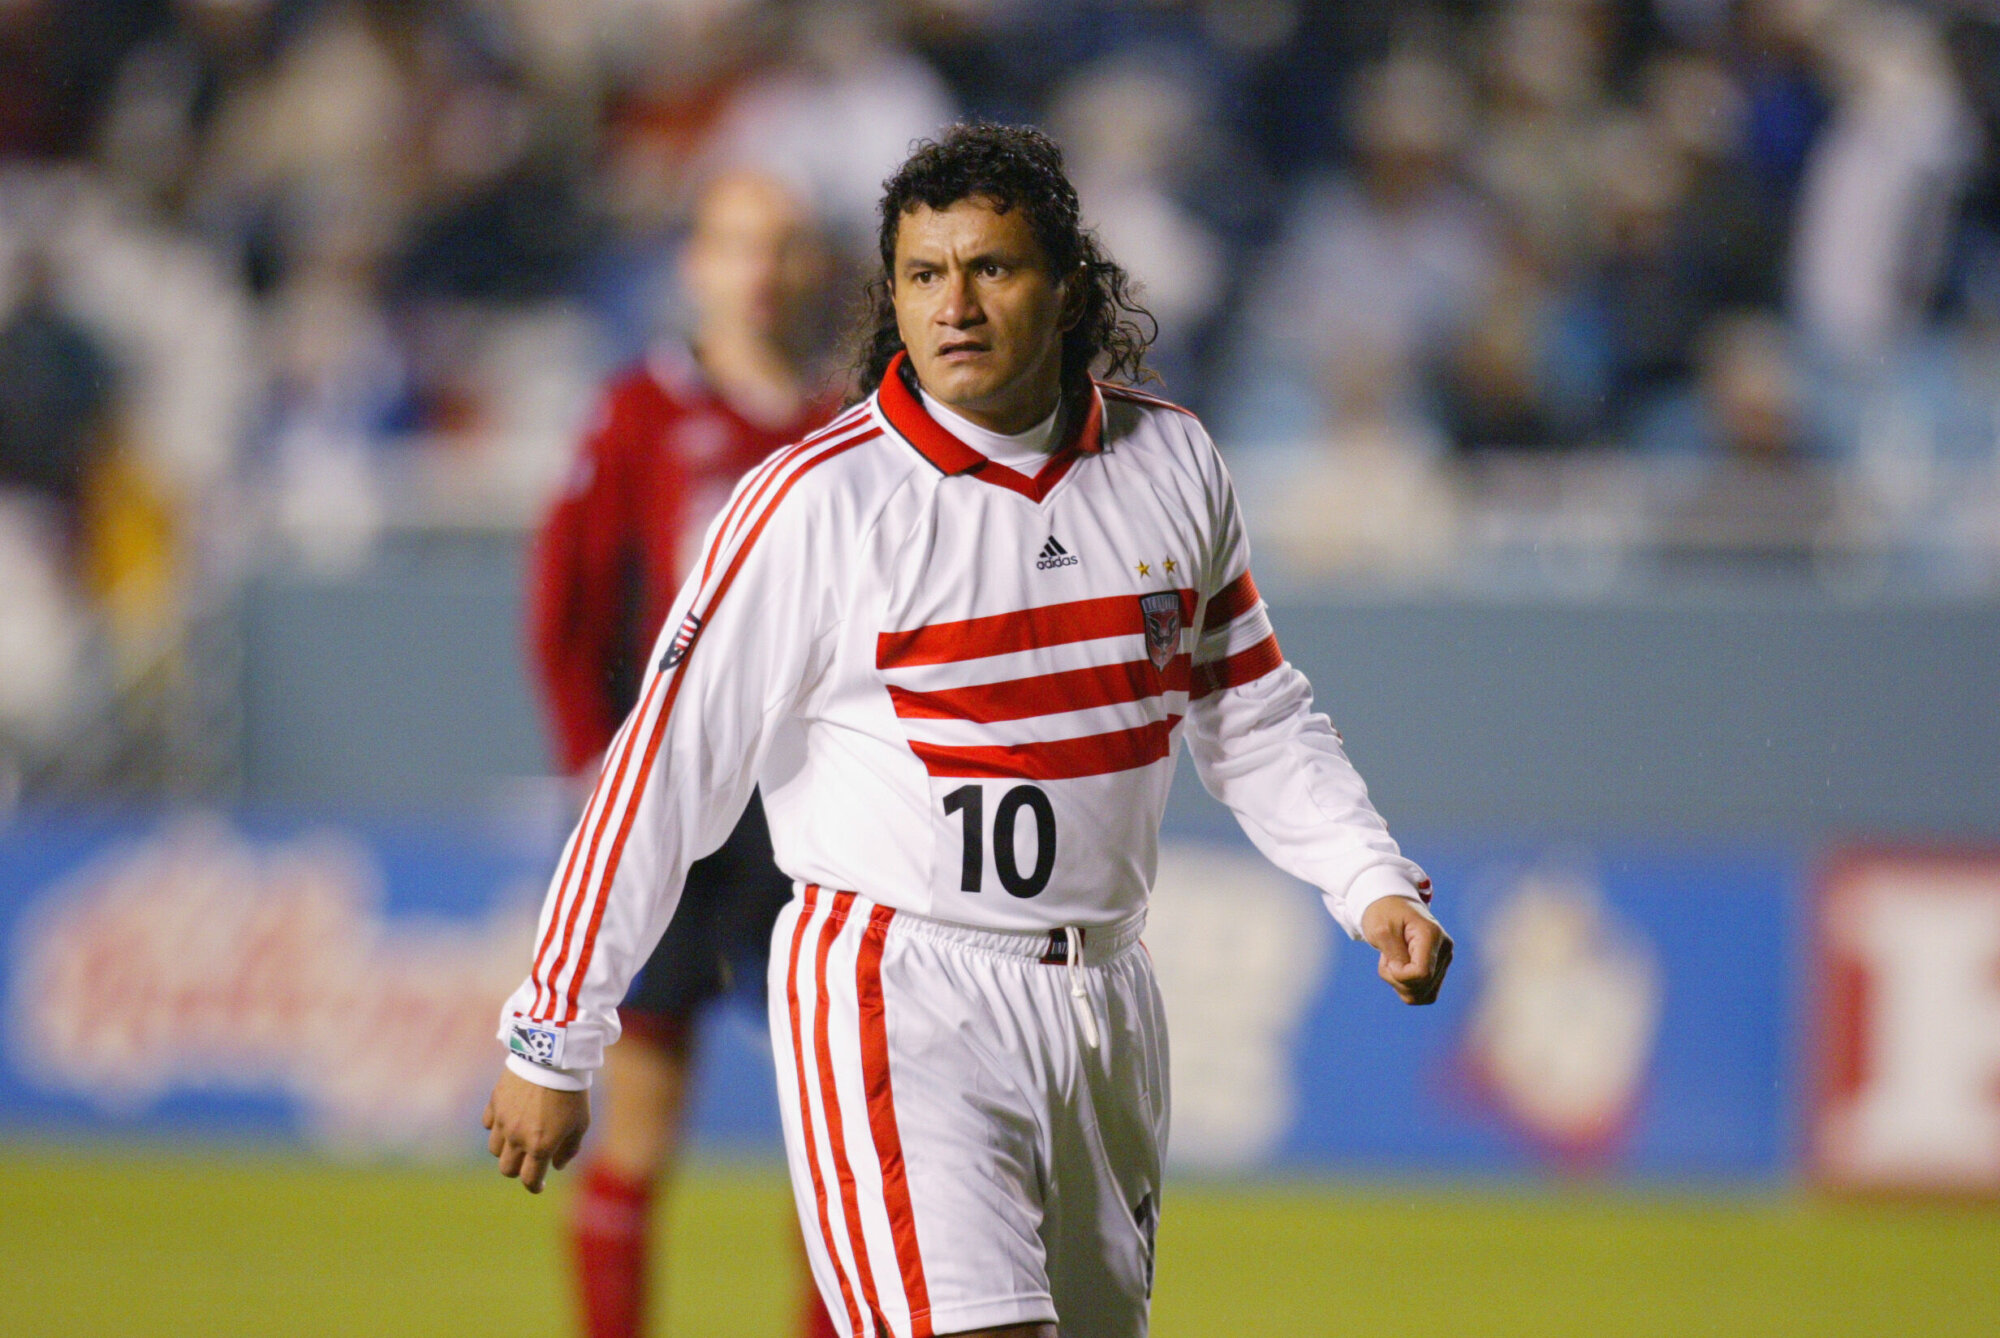 Jaime Moreno grateful to take place in National Soccer Hall of